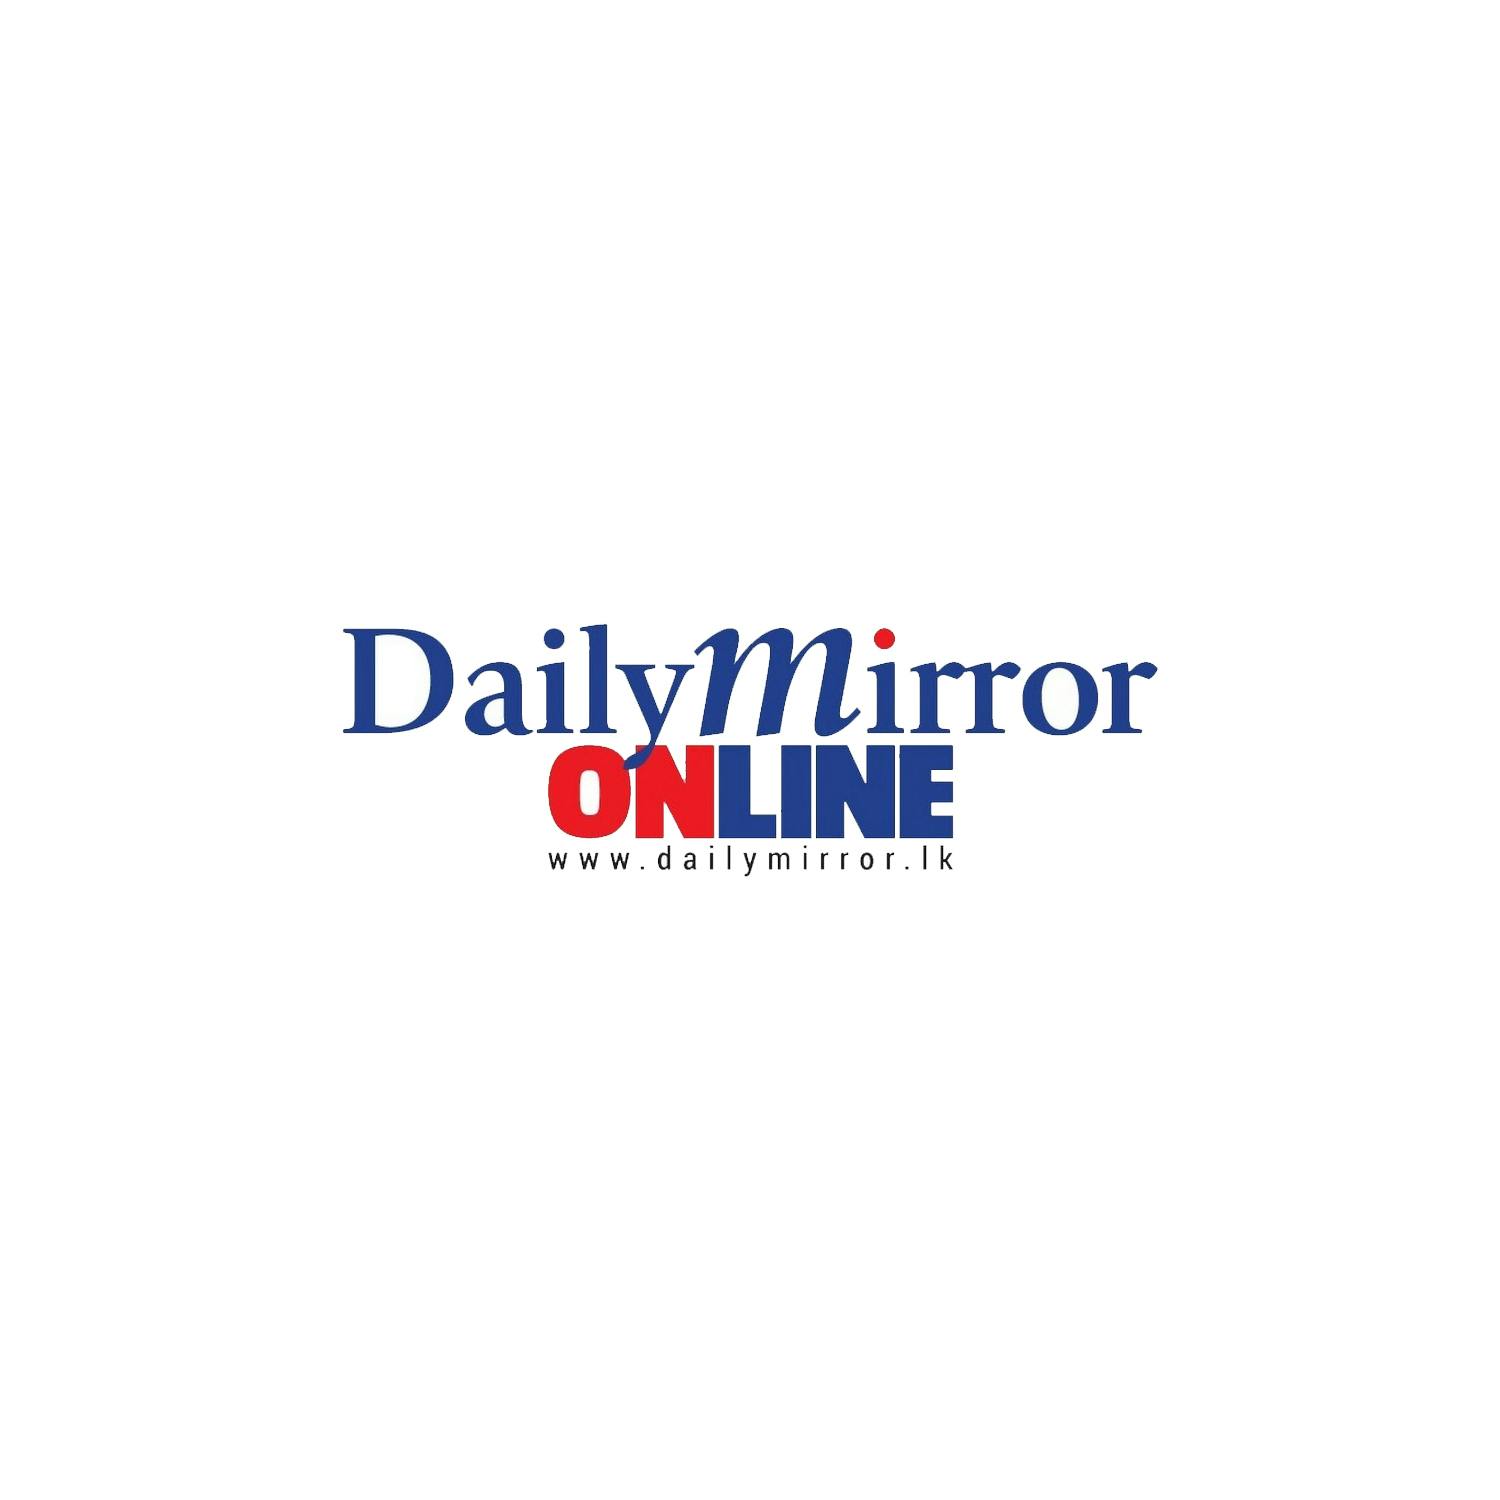 News Article published by Daily Mirror about Lanka Realty Investments PLC